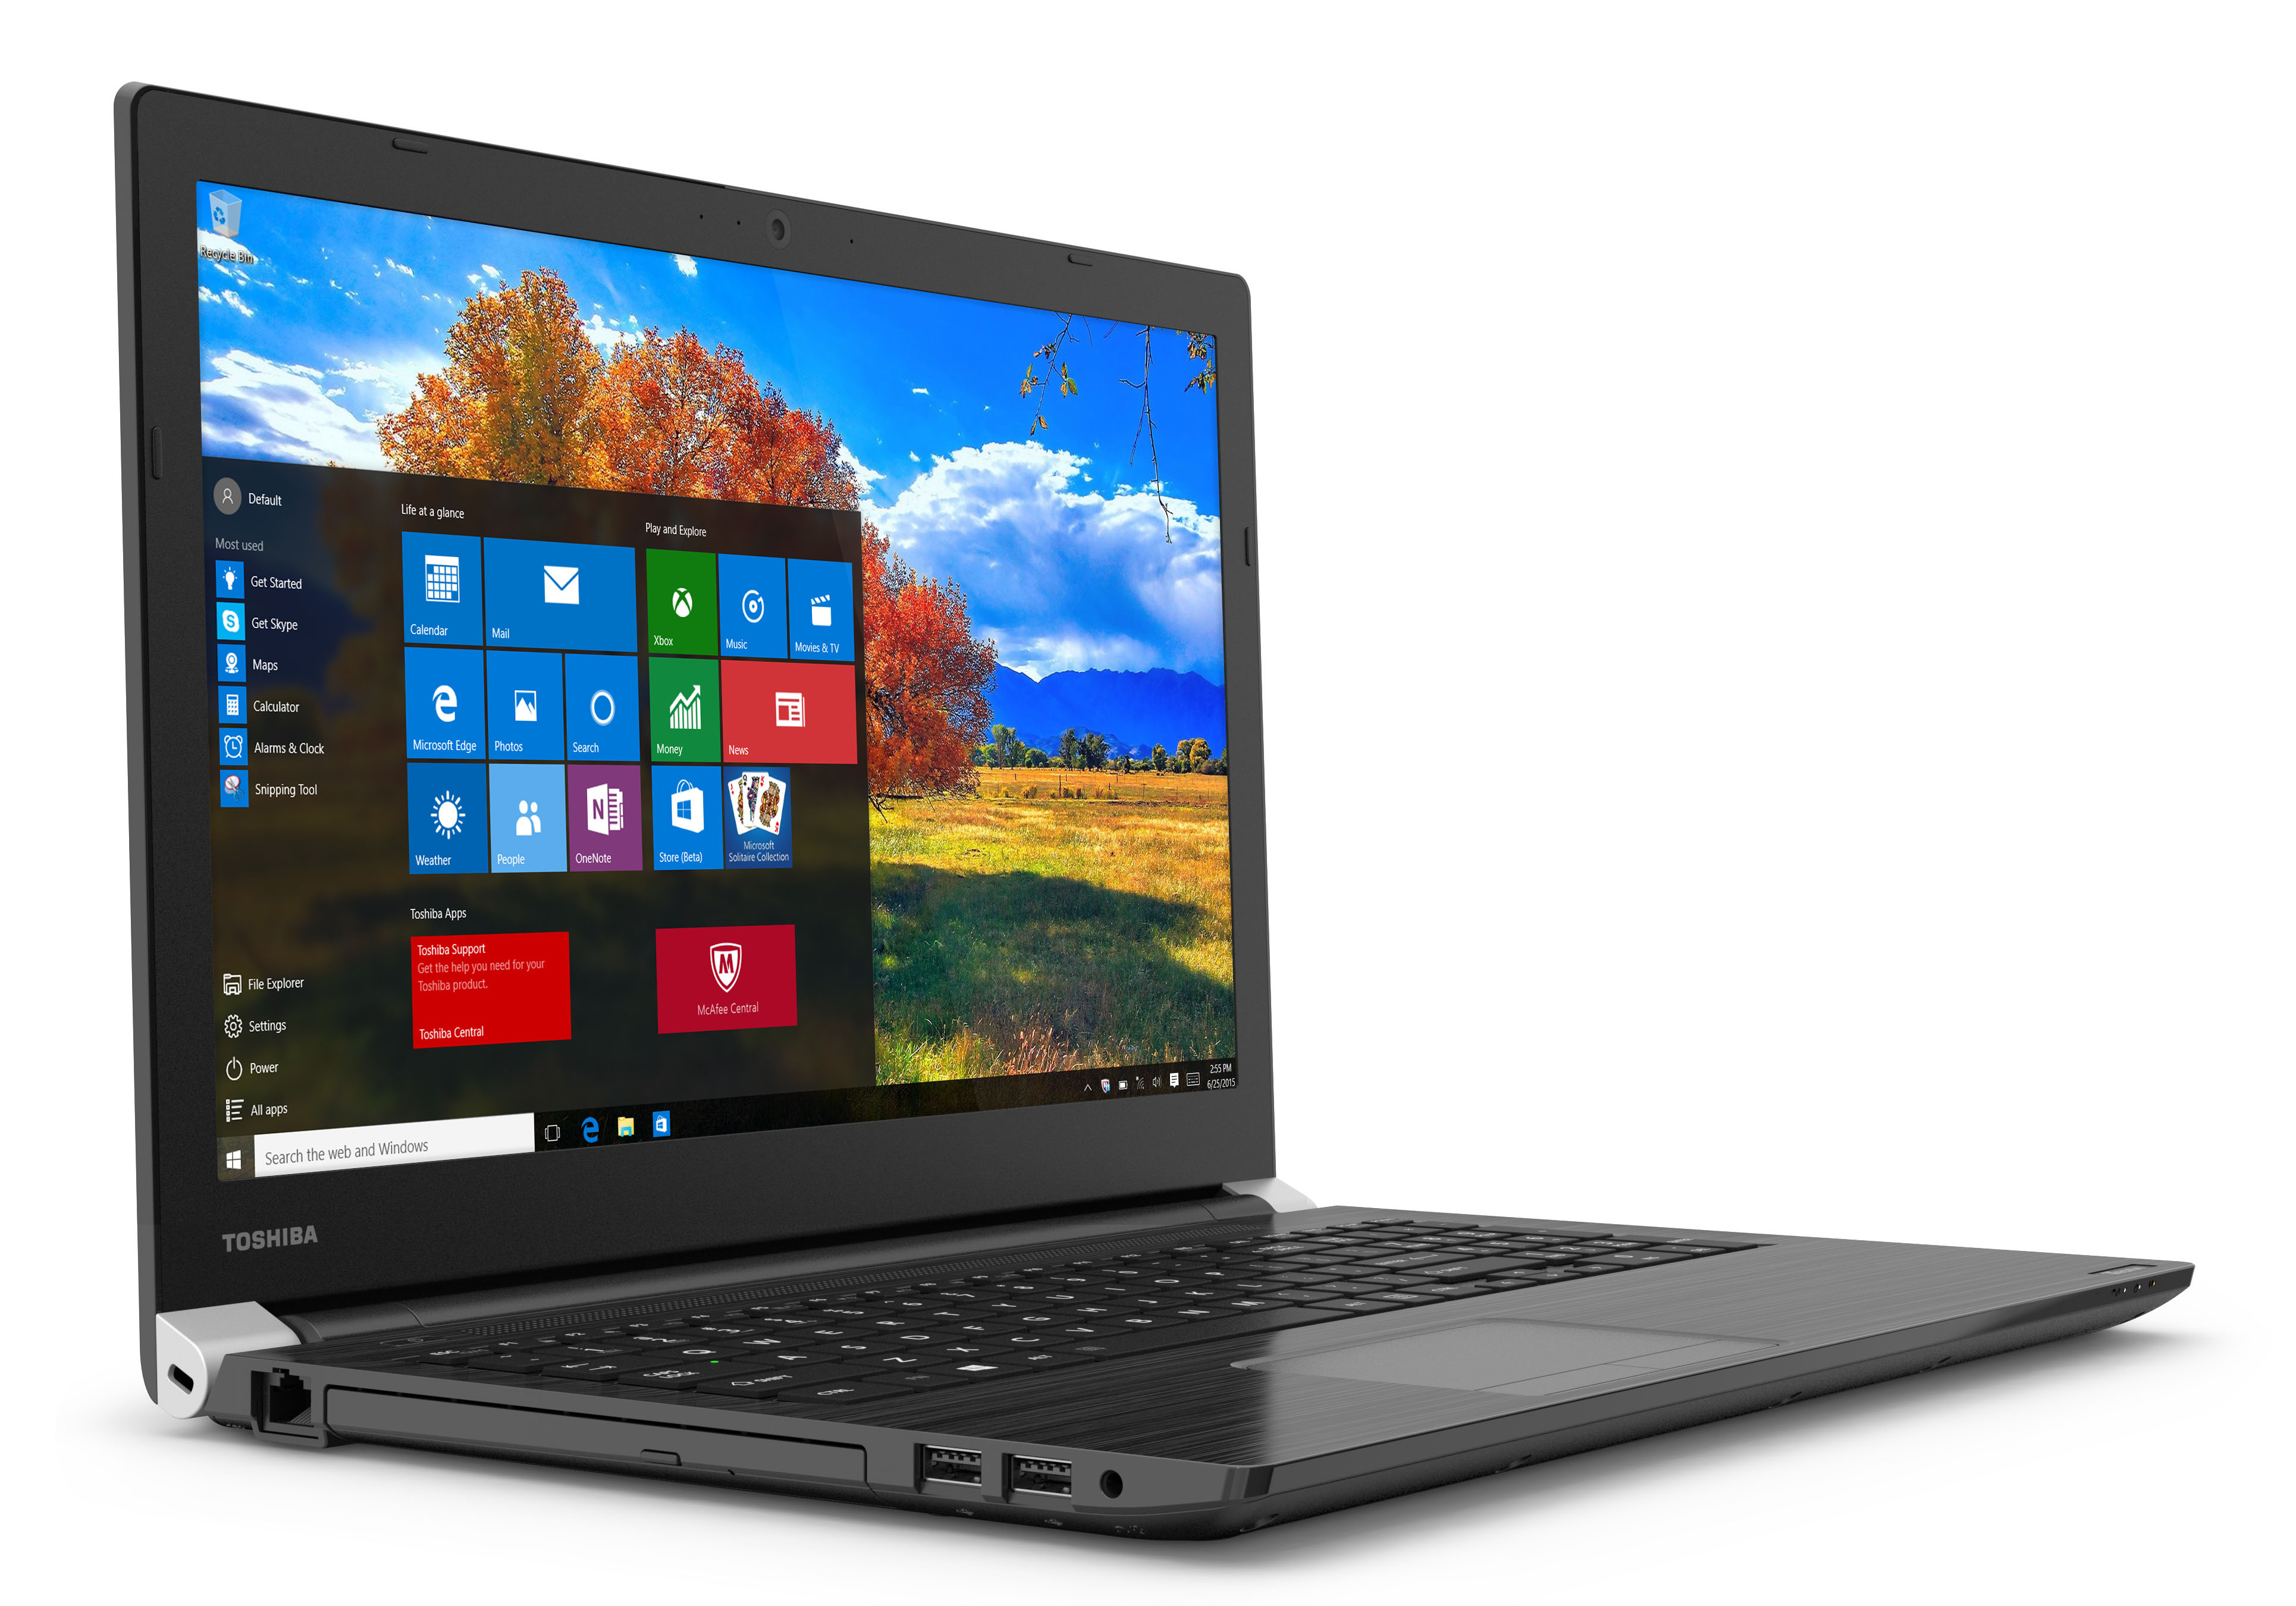 Toshiba Expands SMB Offering with New Windows 10 Ready Laptop